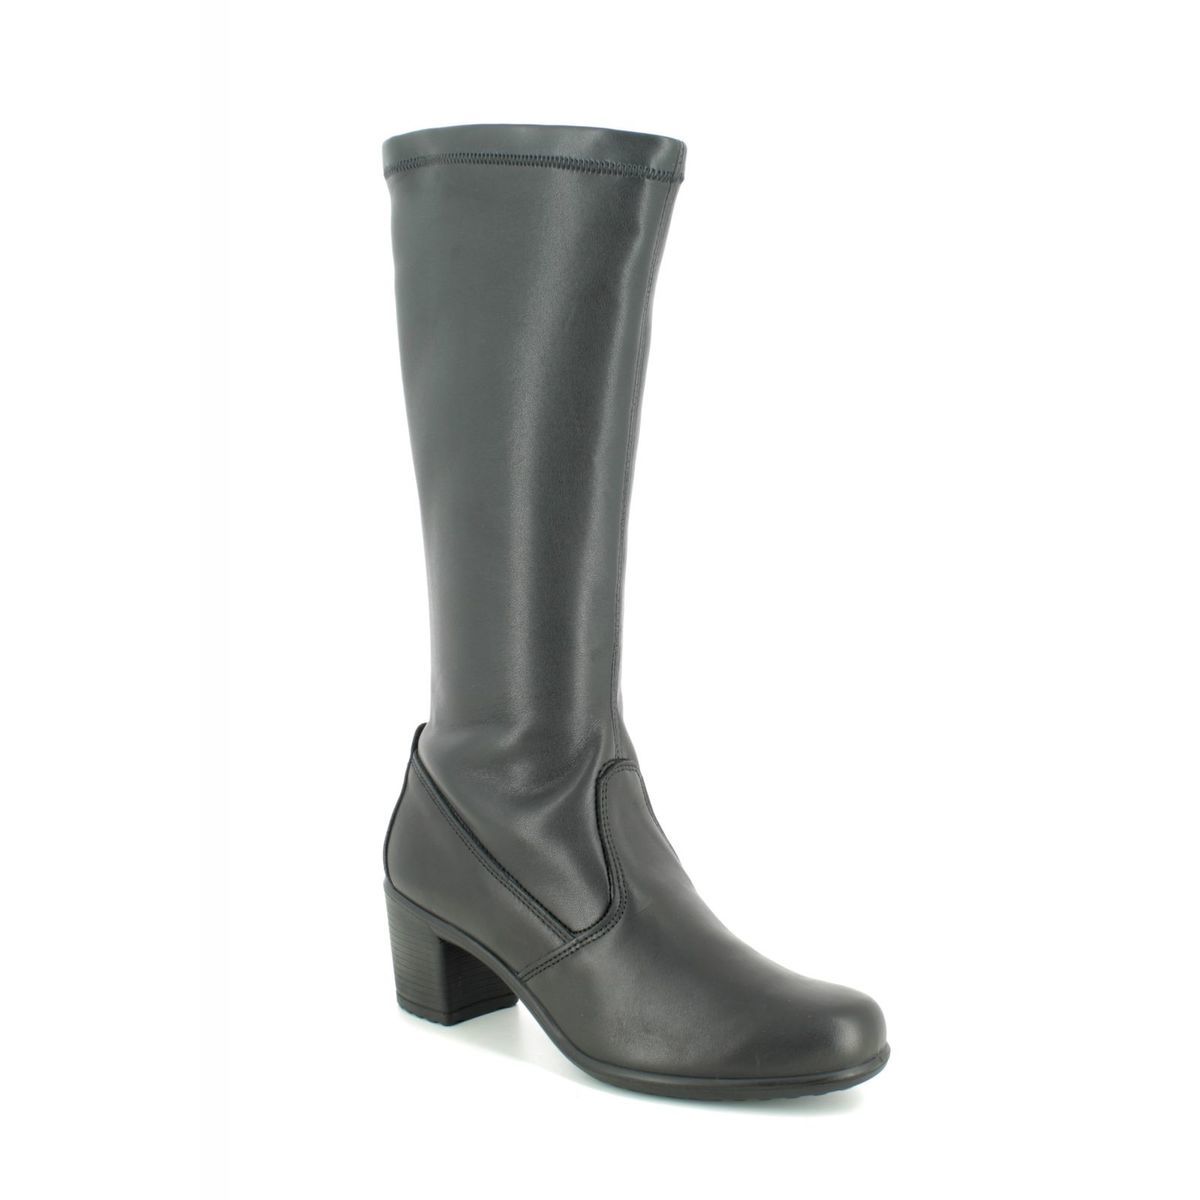 IMAC Daytolong Black leather Womens knee-high boots 6000-1400011 in a Plain Leather in Size 40